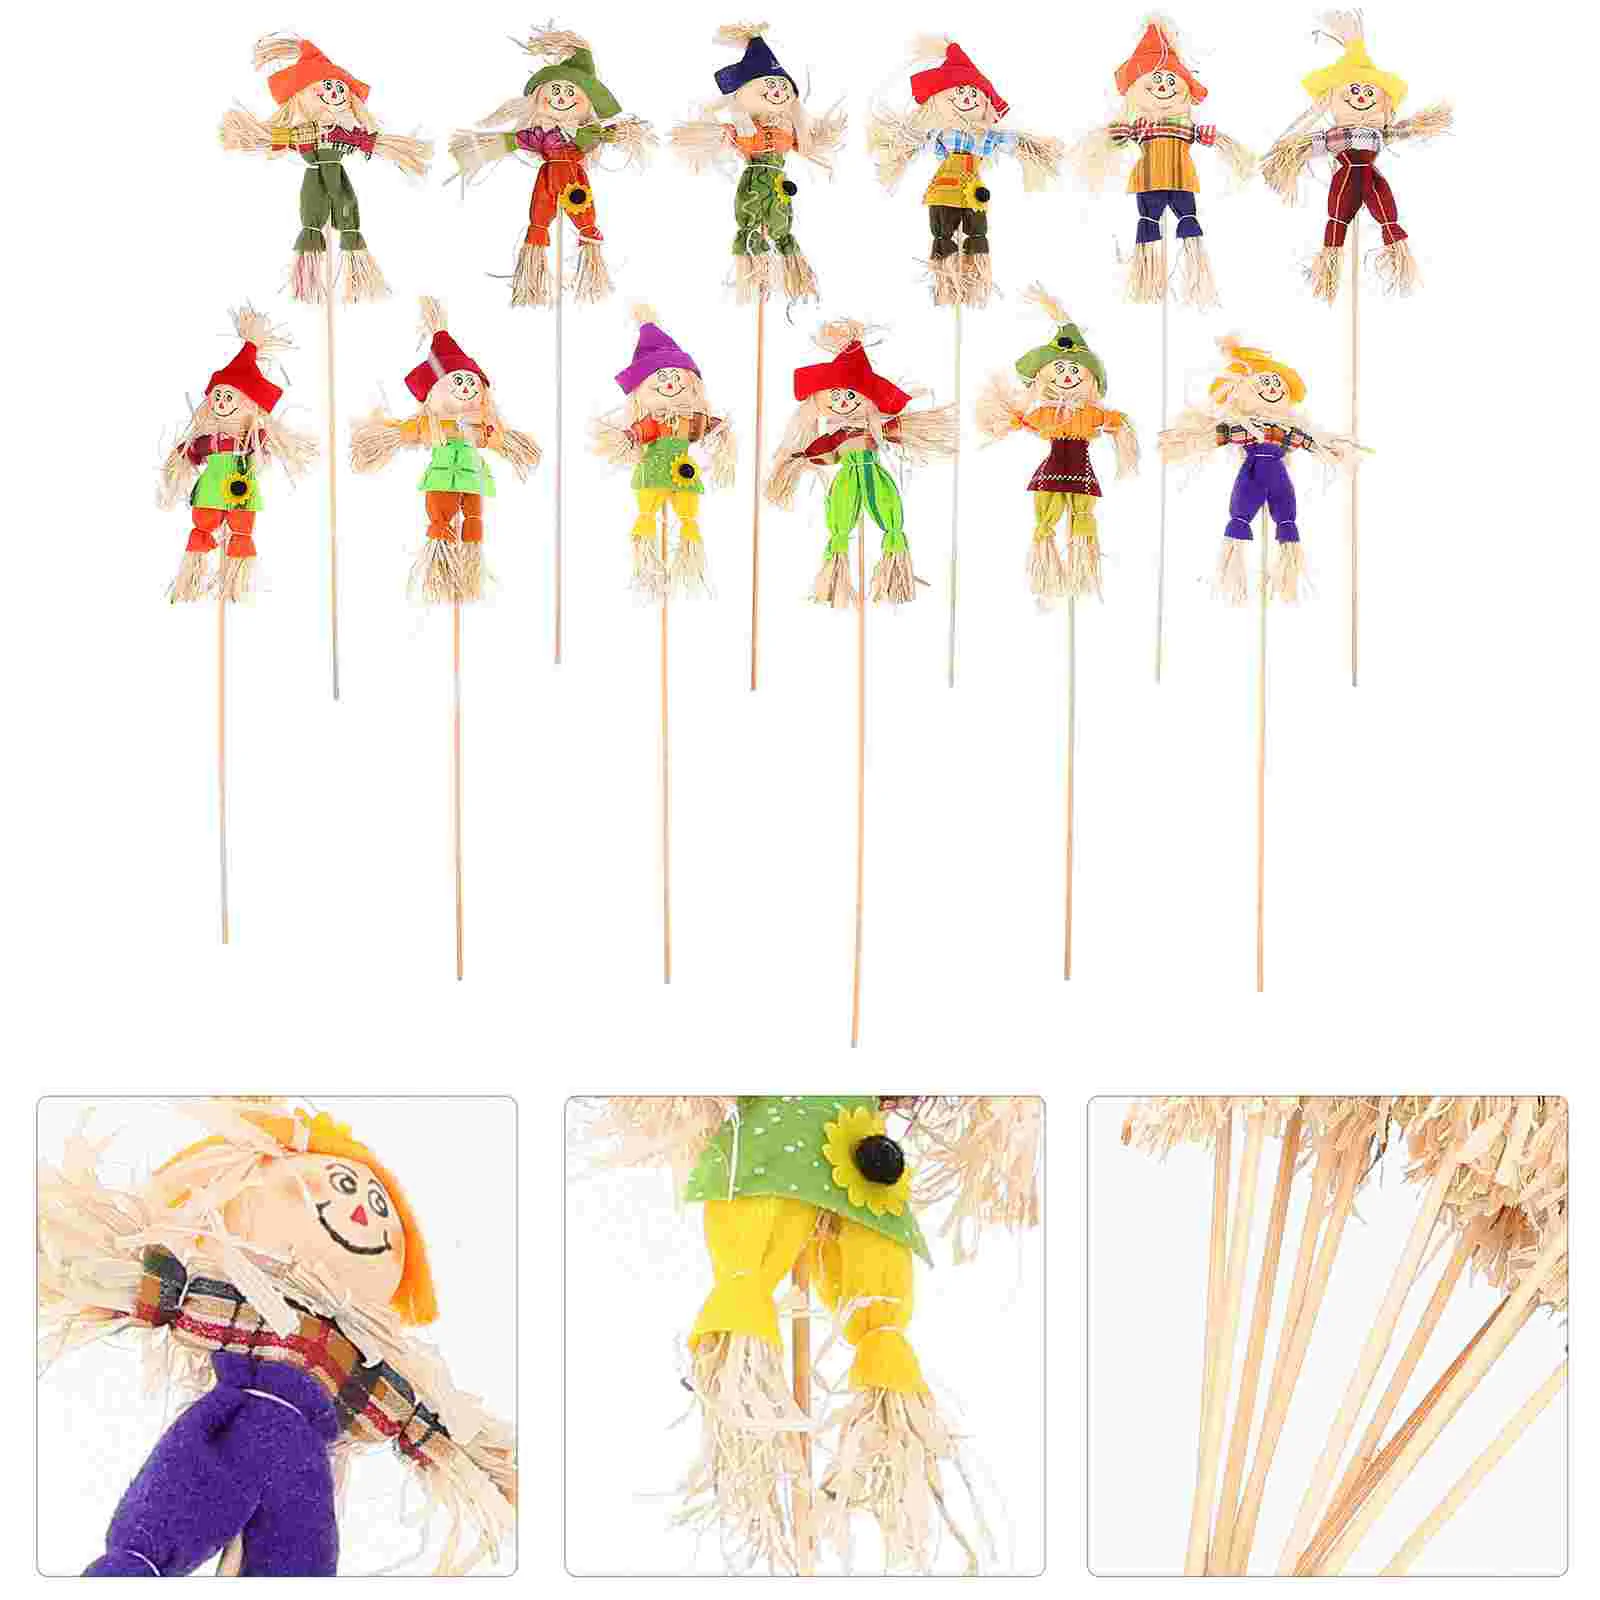 

12 Pcs Scarecrow Decoration Thanksgiving Party Ornament Fall Yard Insert Halloween Cartoon Scarecrows Rural